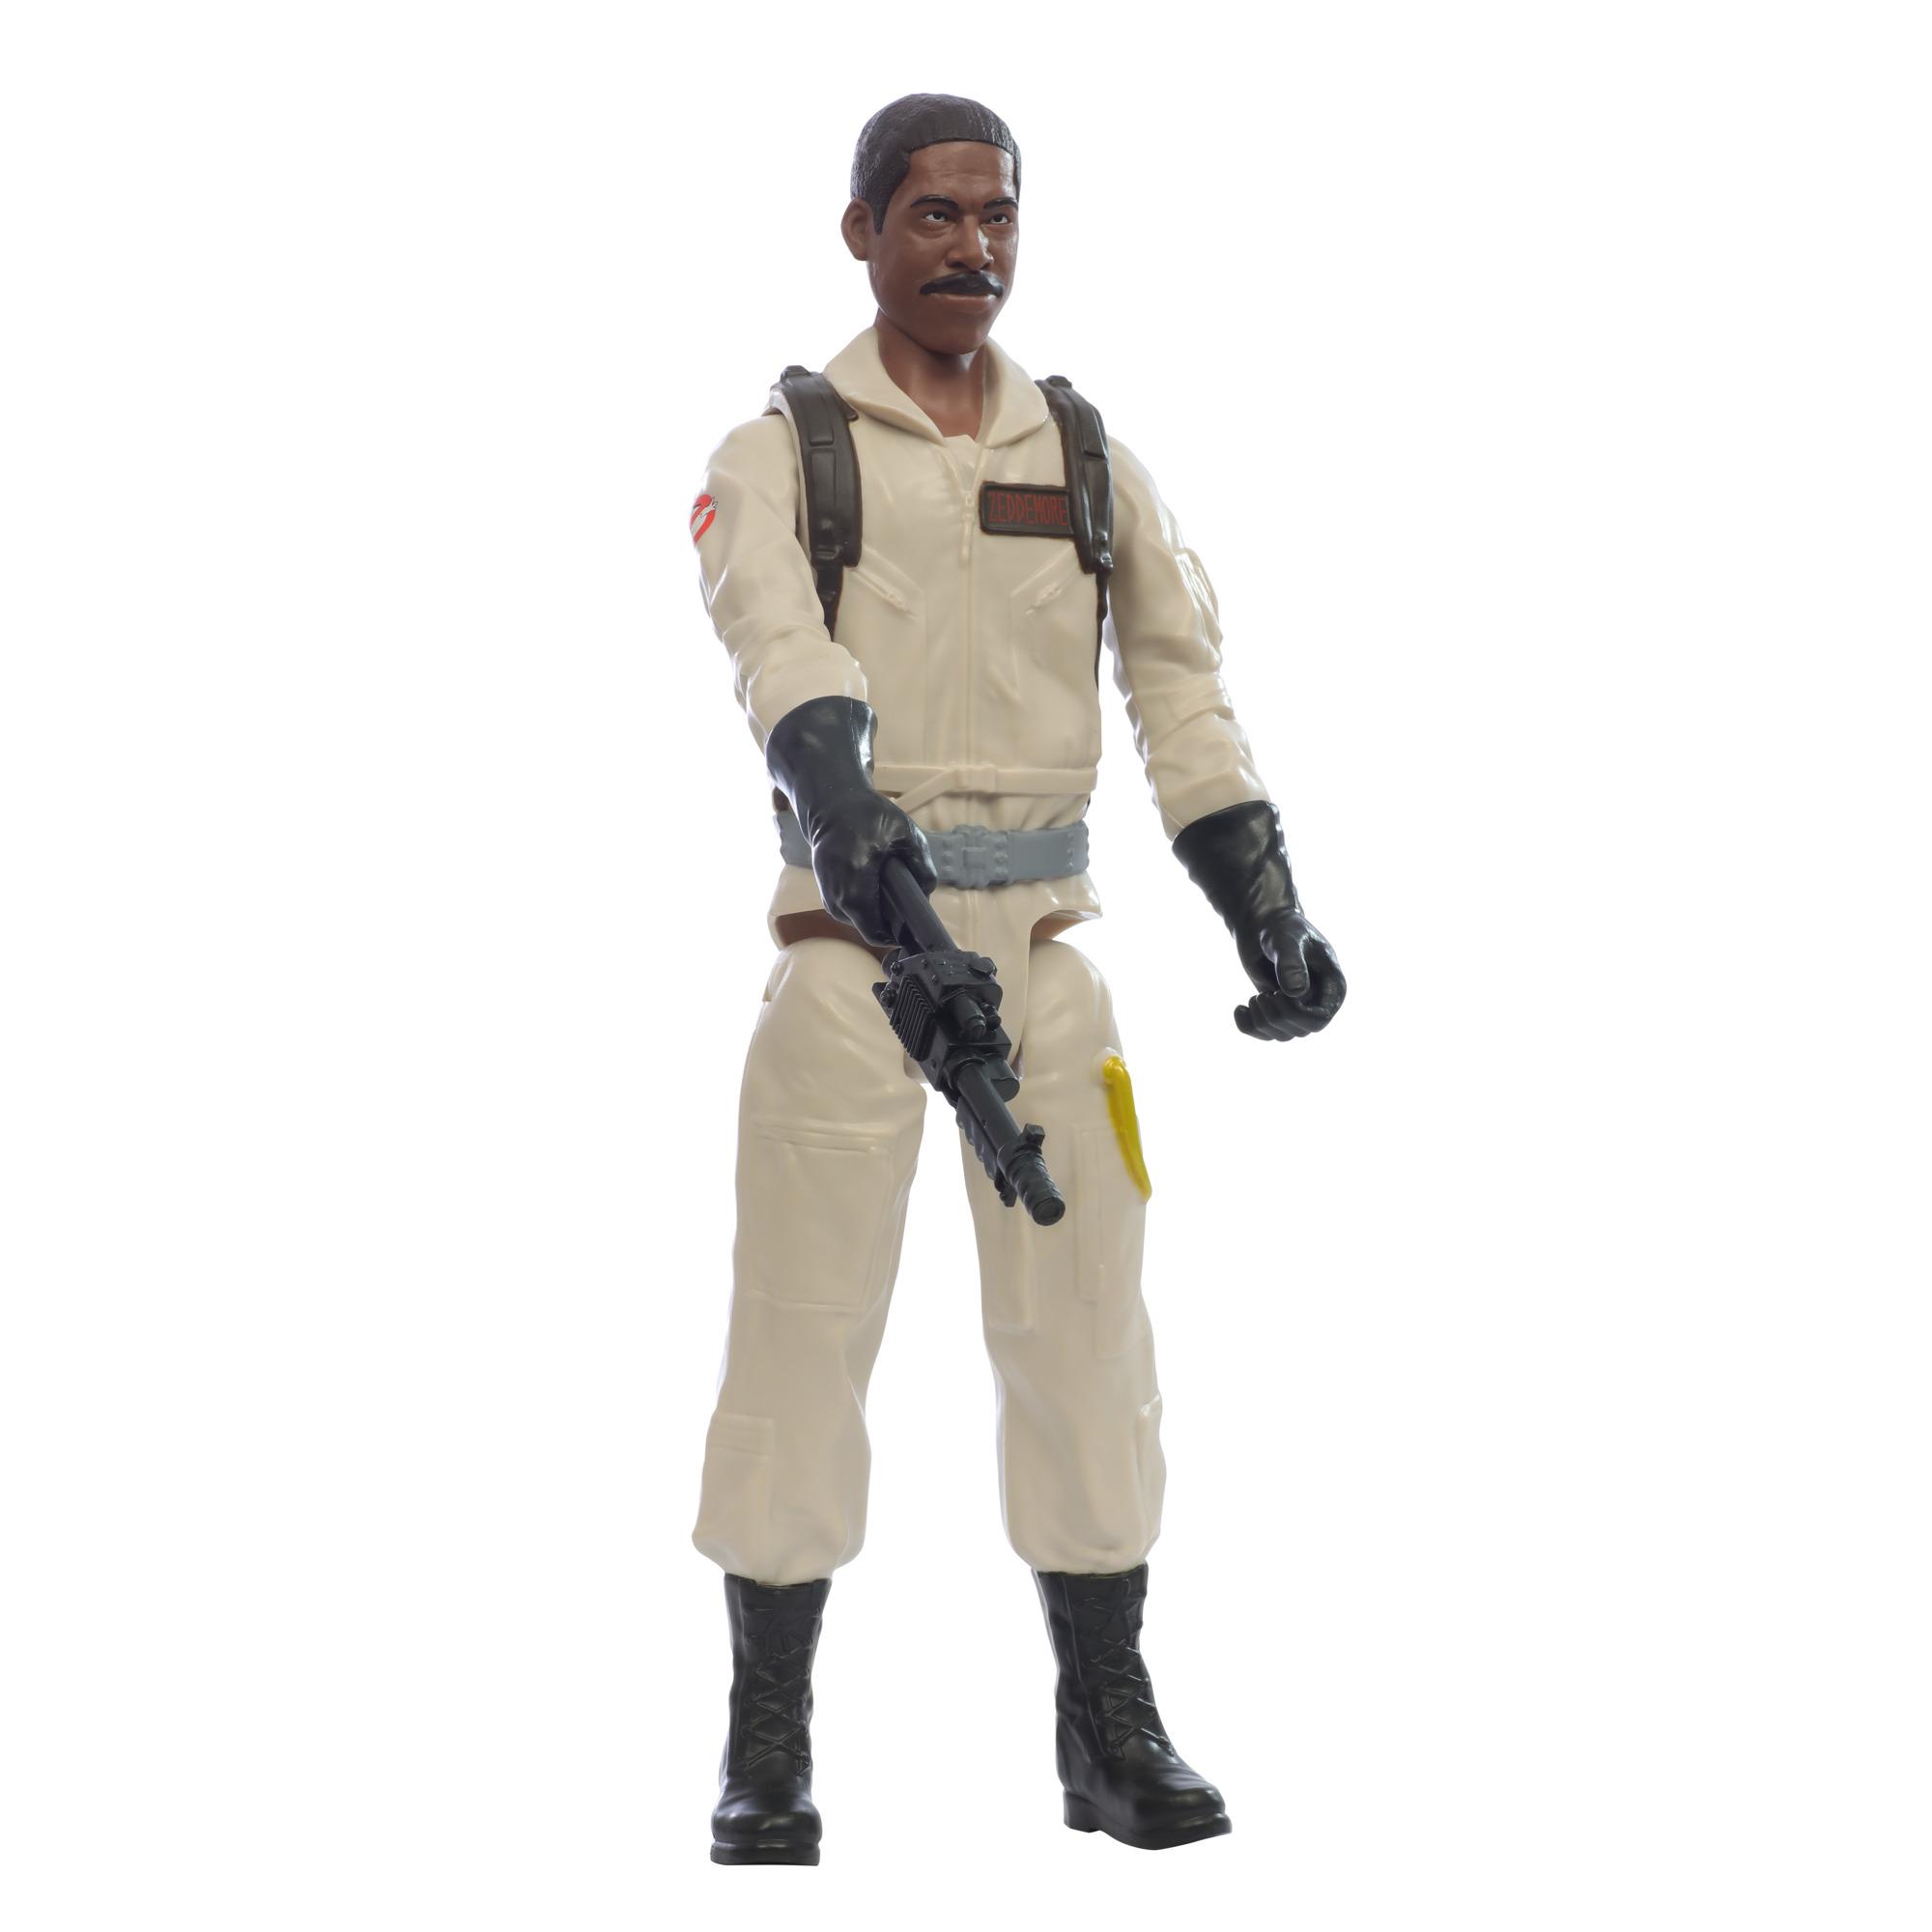 Ghostbusters Winston Zeddemore Toy 12-Inch-Scale Collectible Classic 1984 Ghostbusters Figure, for Kids Ages 4 and Up